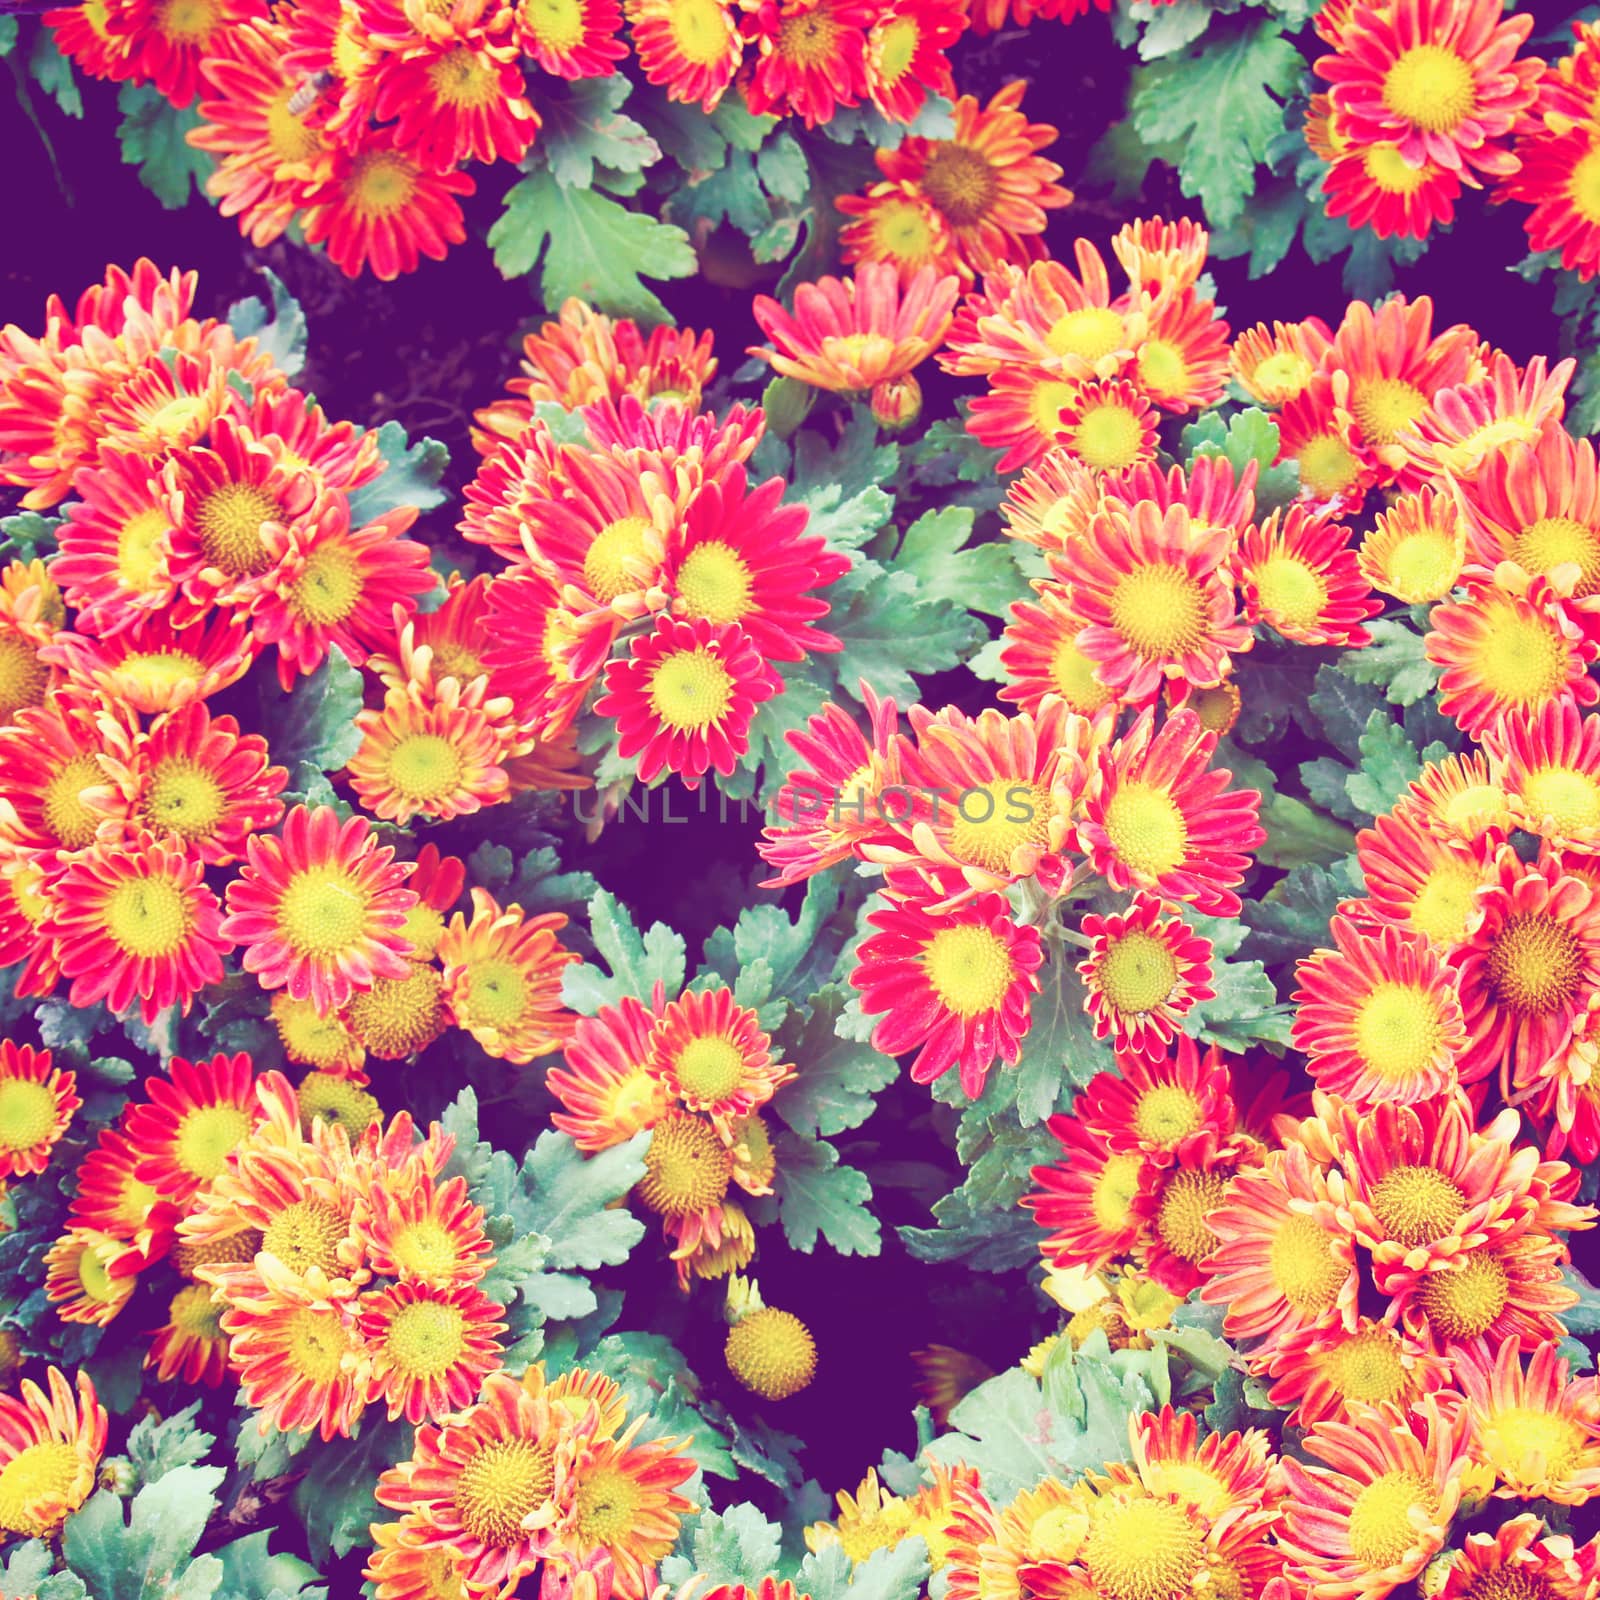 Red flowers background with retro filter effect by nuchylee